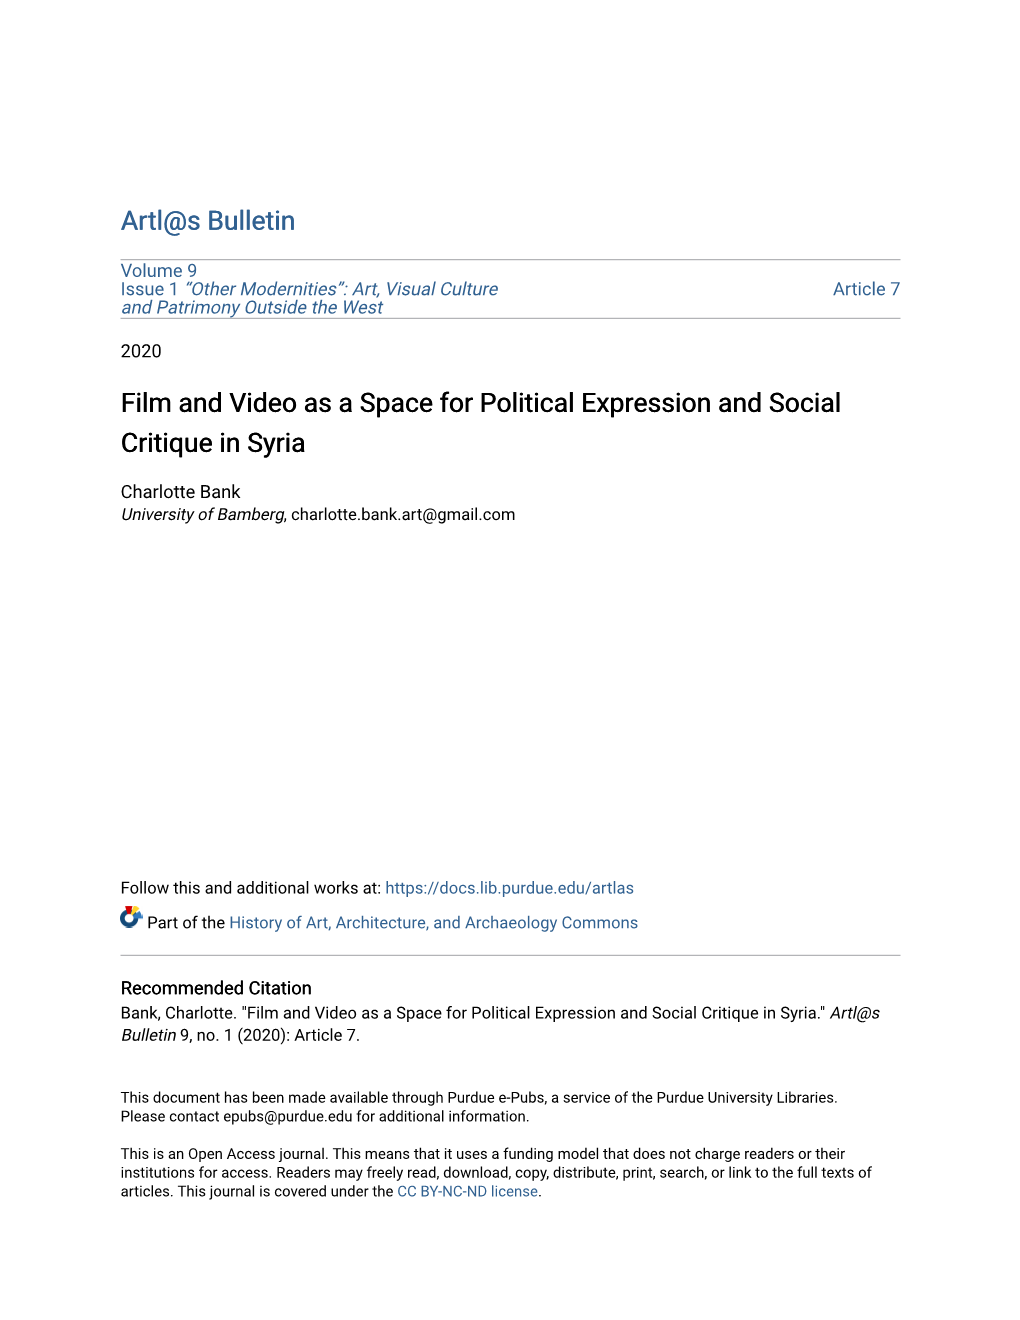 Film and Video As a Space for Political Expression and Social Critique in Syria